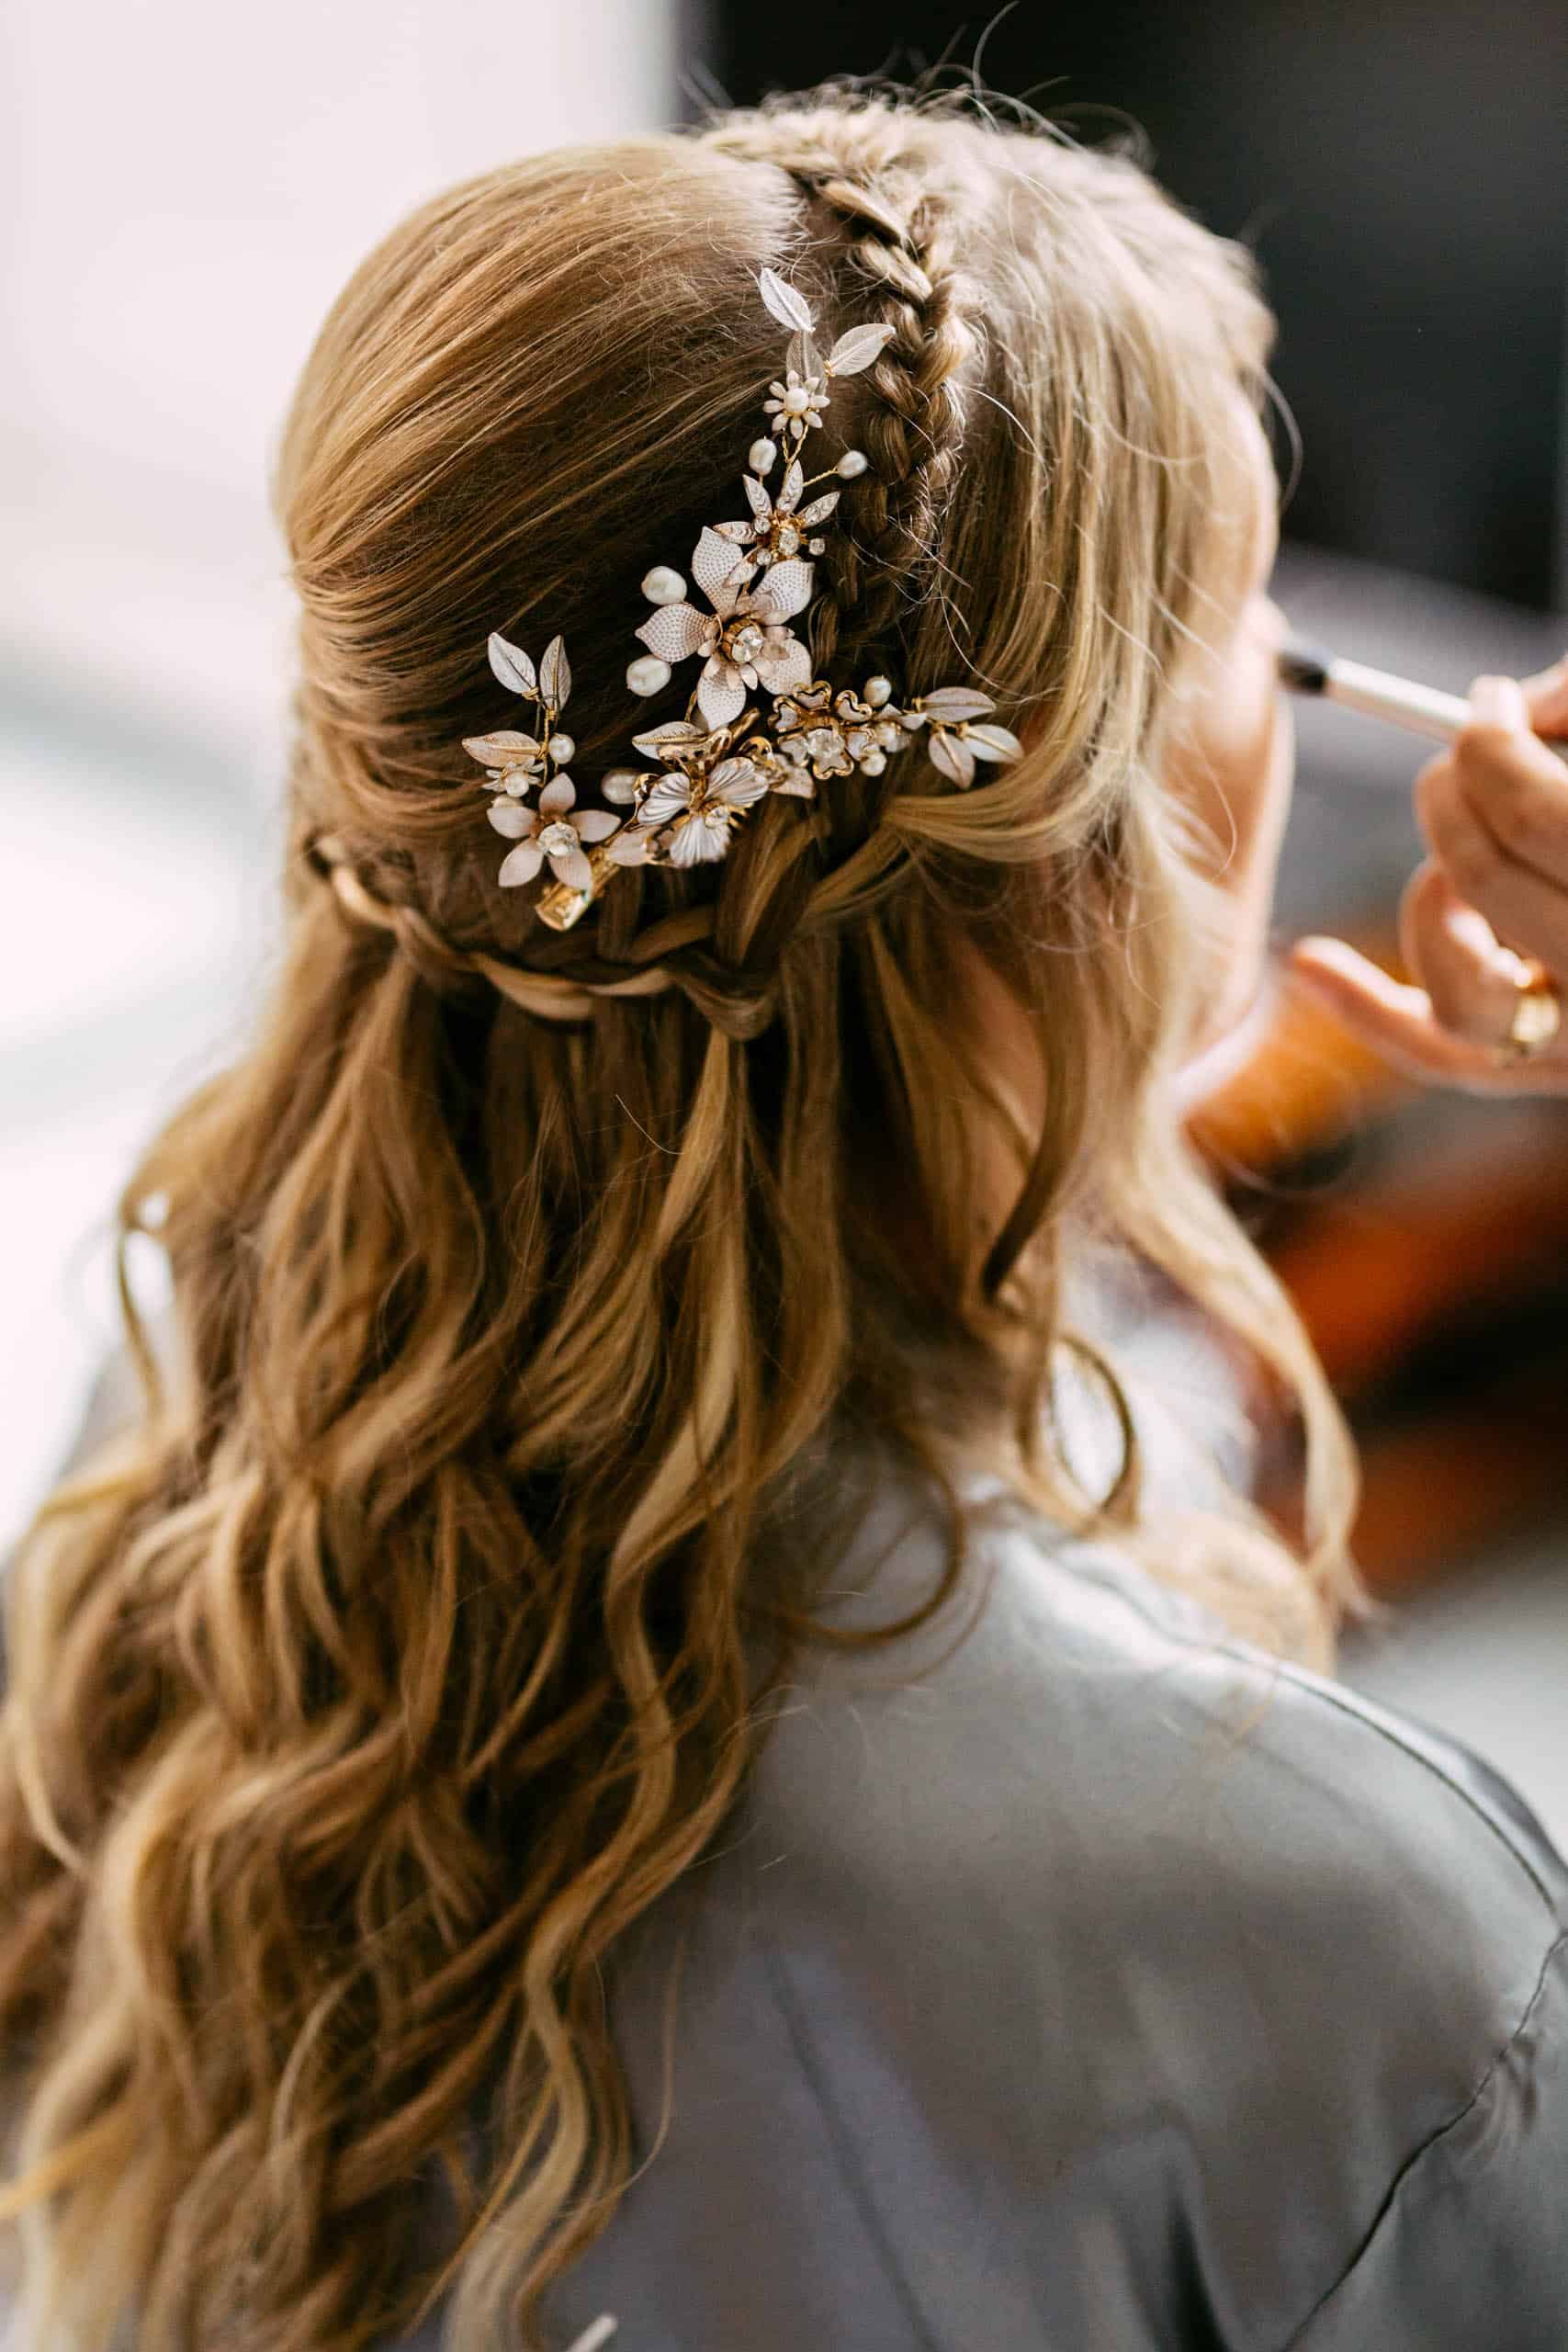 A bride getting her hair done in preparation for her wedding.